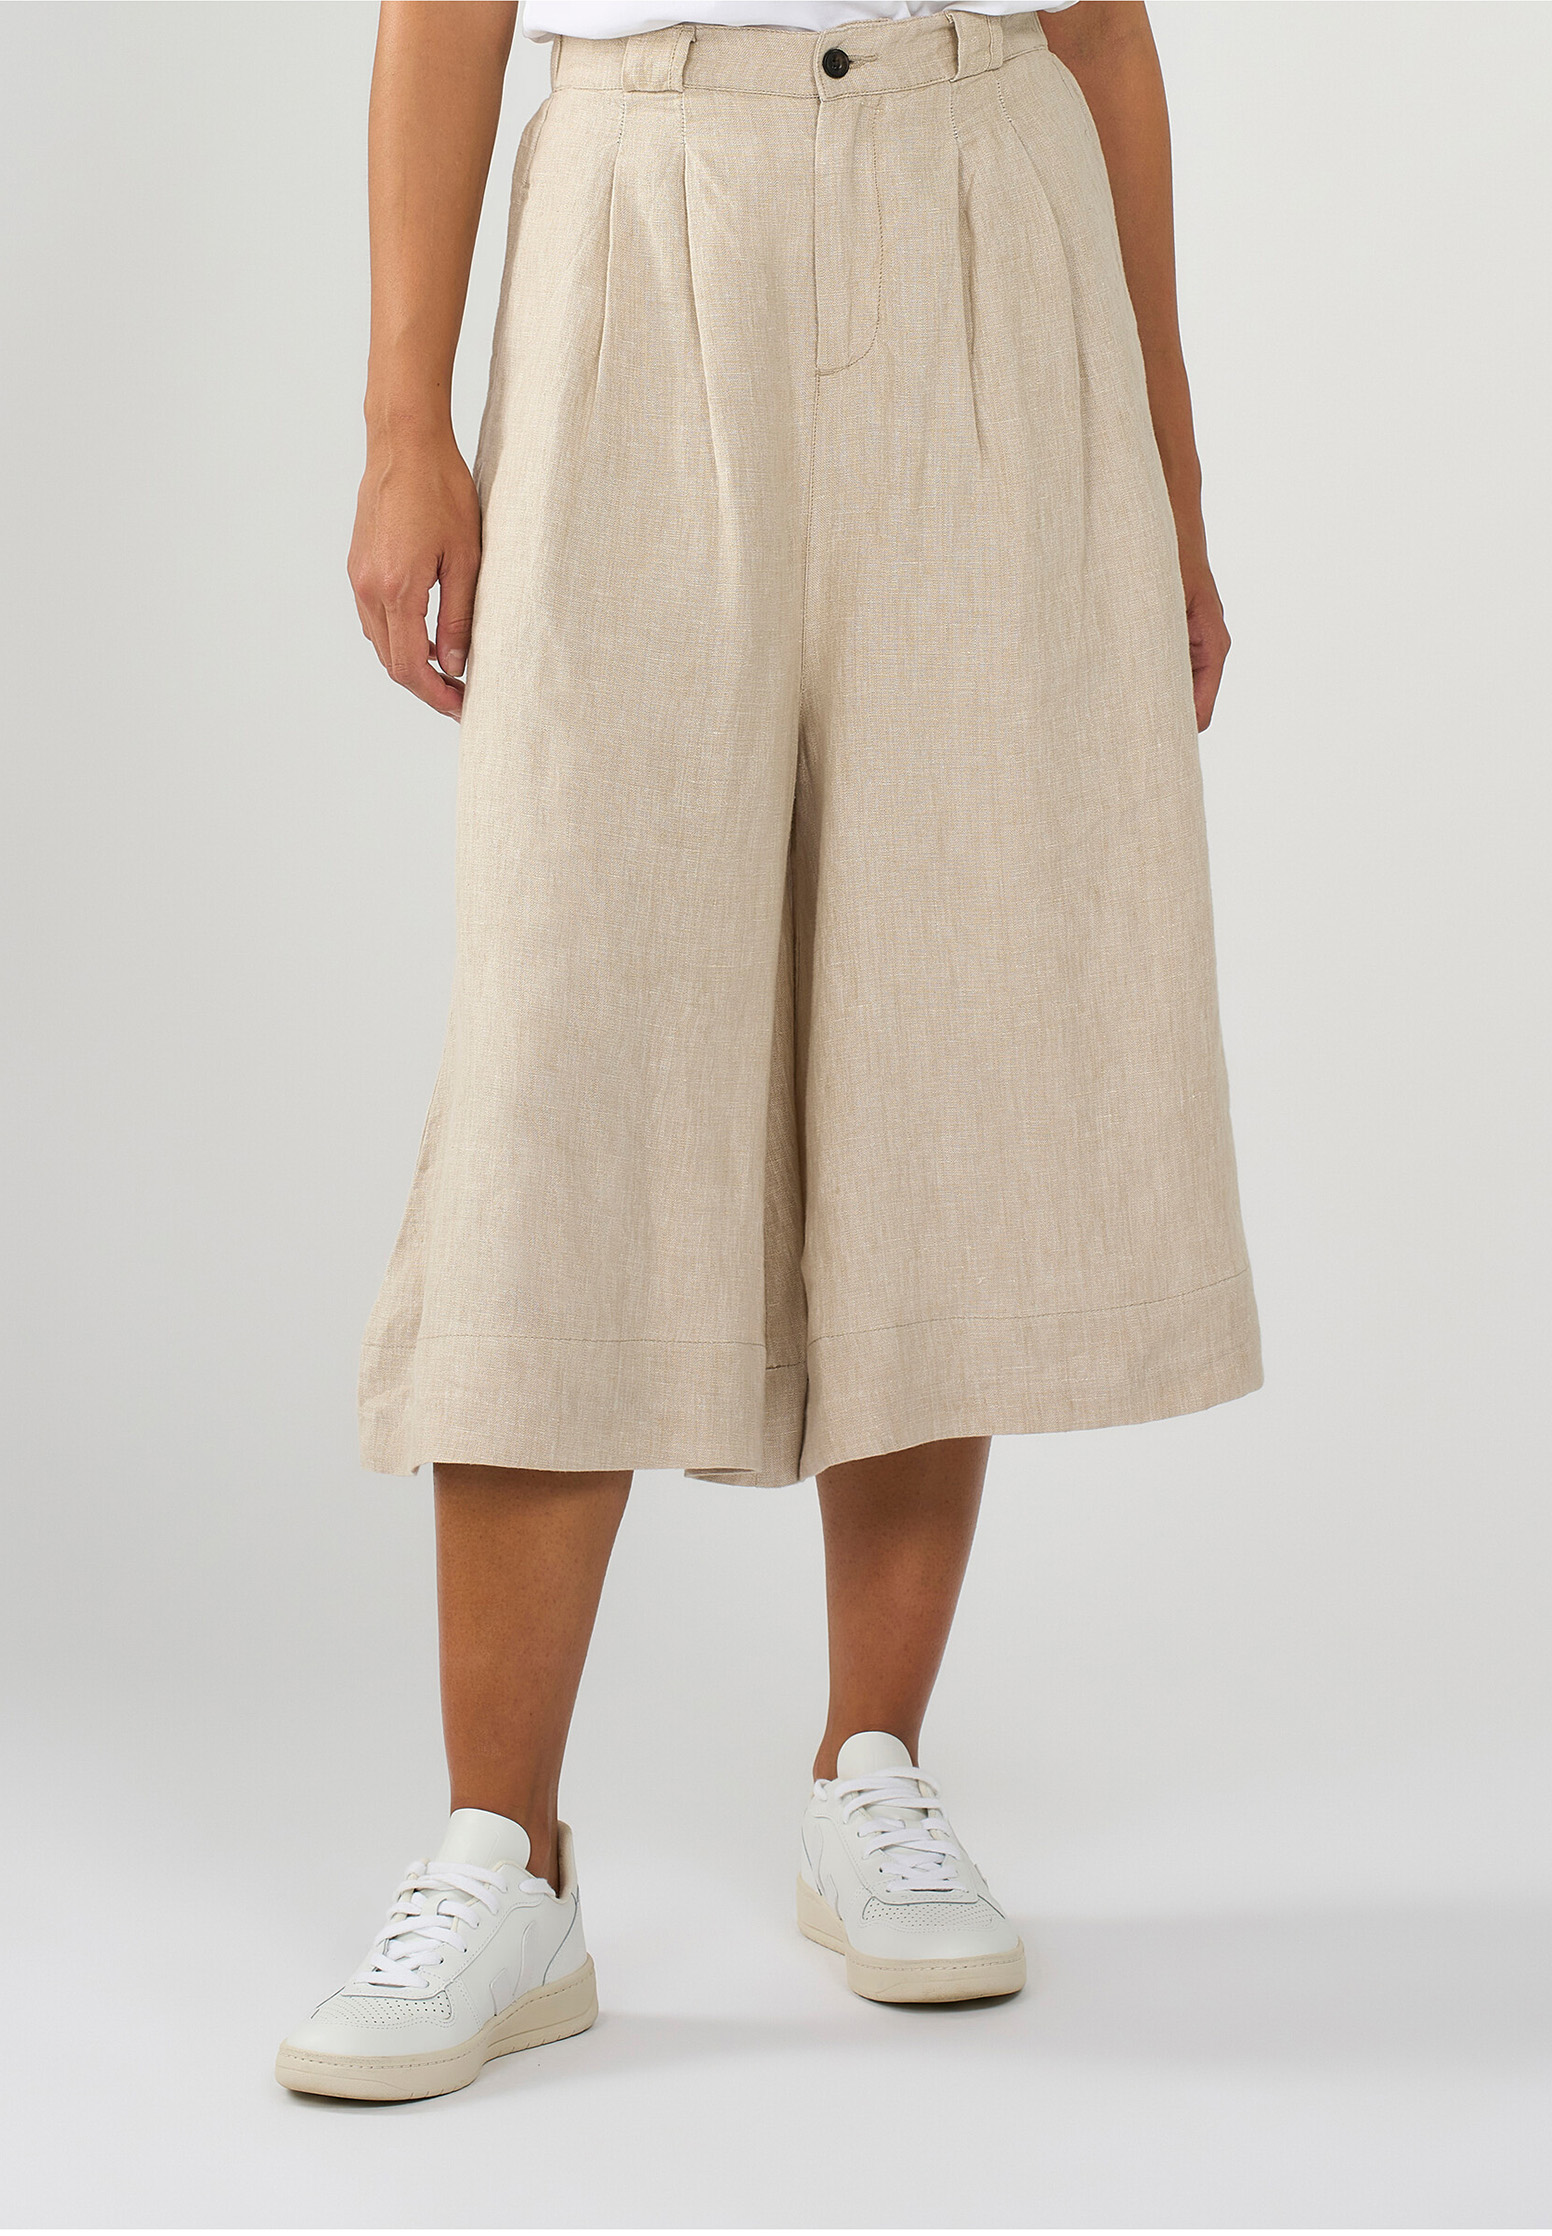 KNOWLEDGECOTTON APPAREL High-Rise Culotte Eve light feather gray M